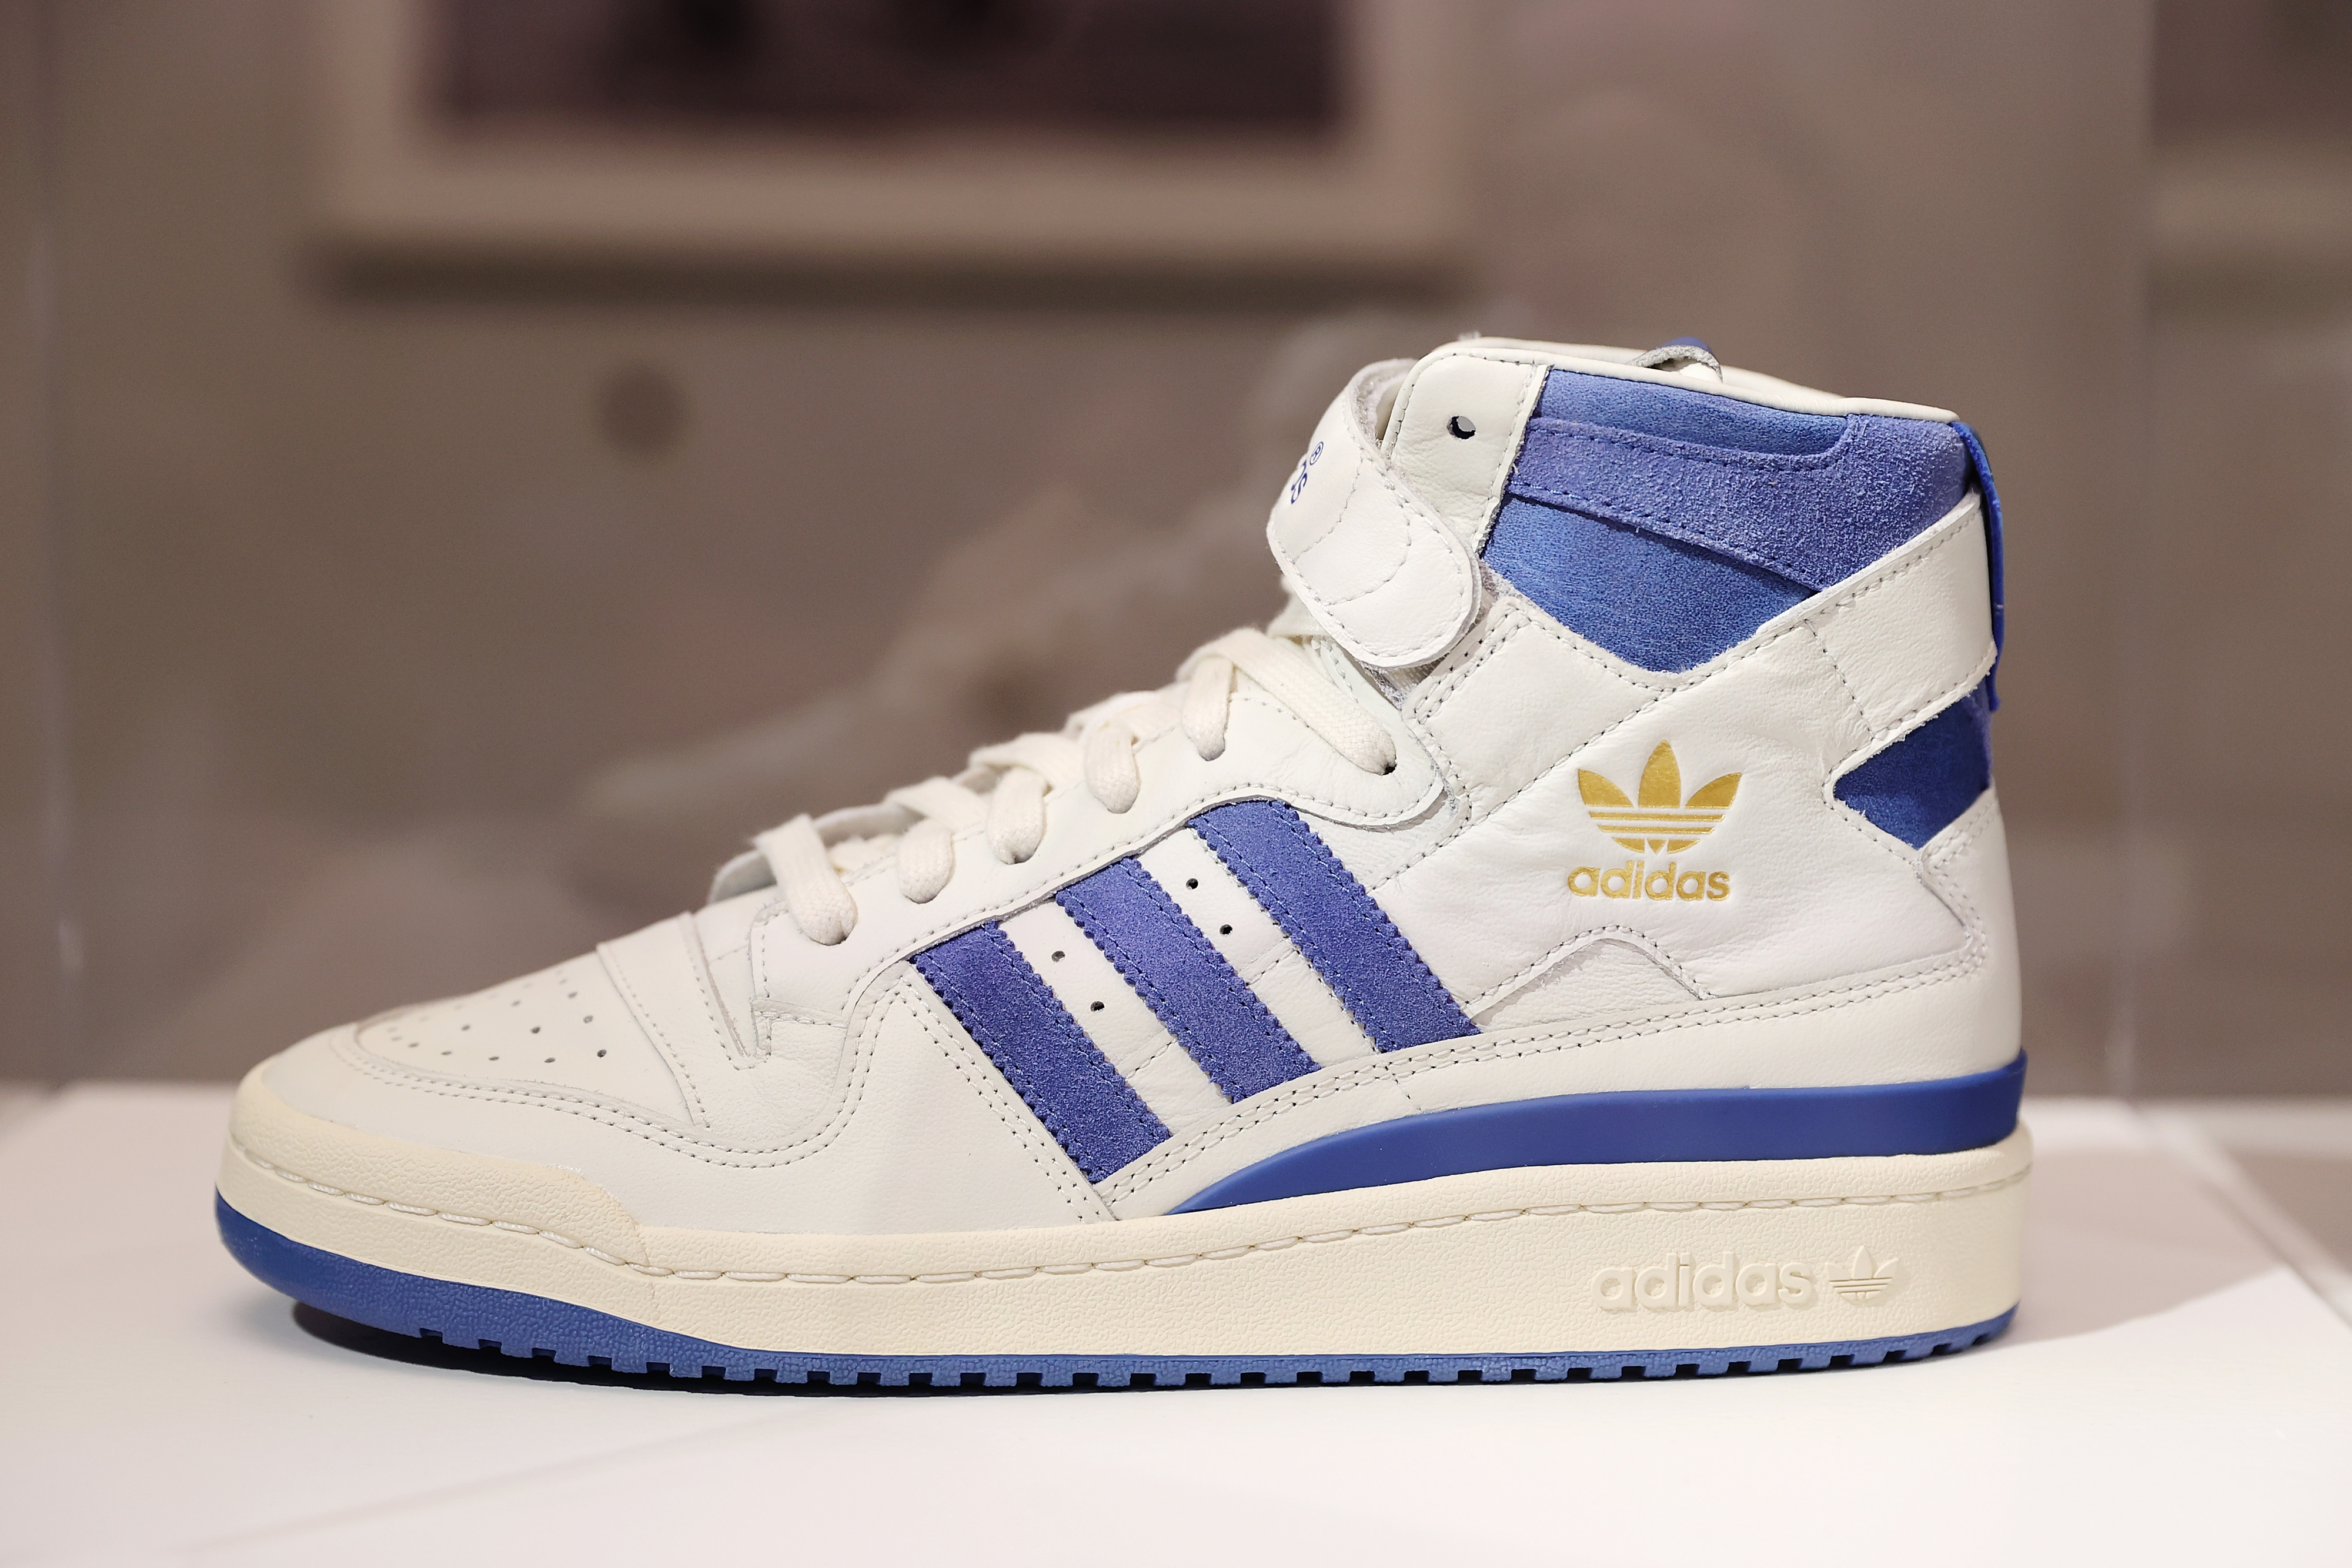 White and blue Adidas high-top sneaker on display